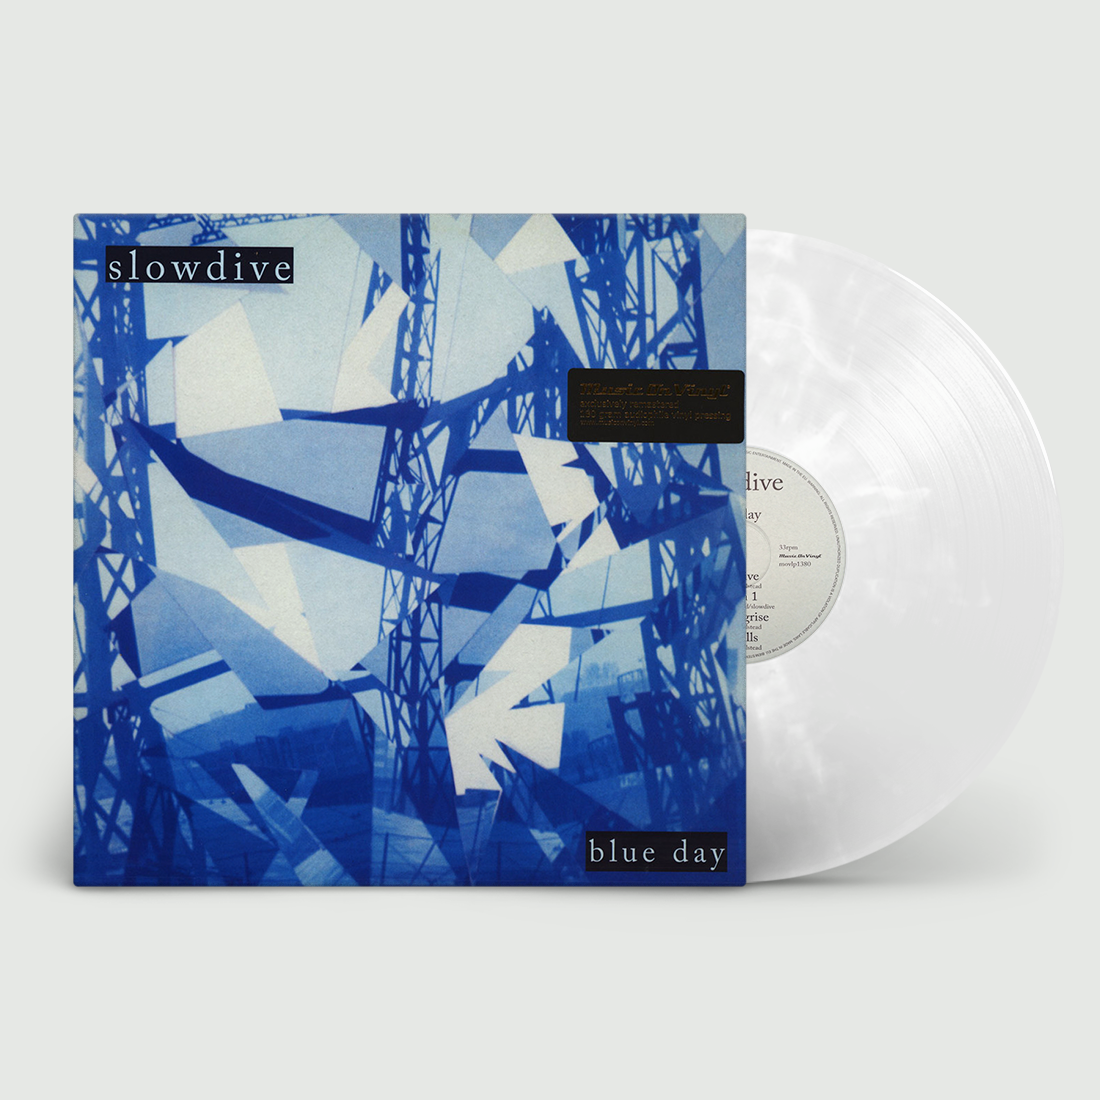 Slowdive - Blue Day (Limited Edition White Marbled Vinyl)